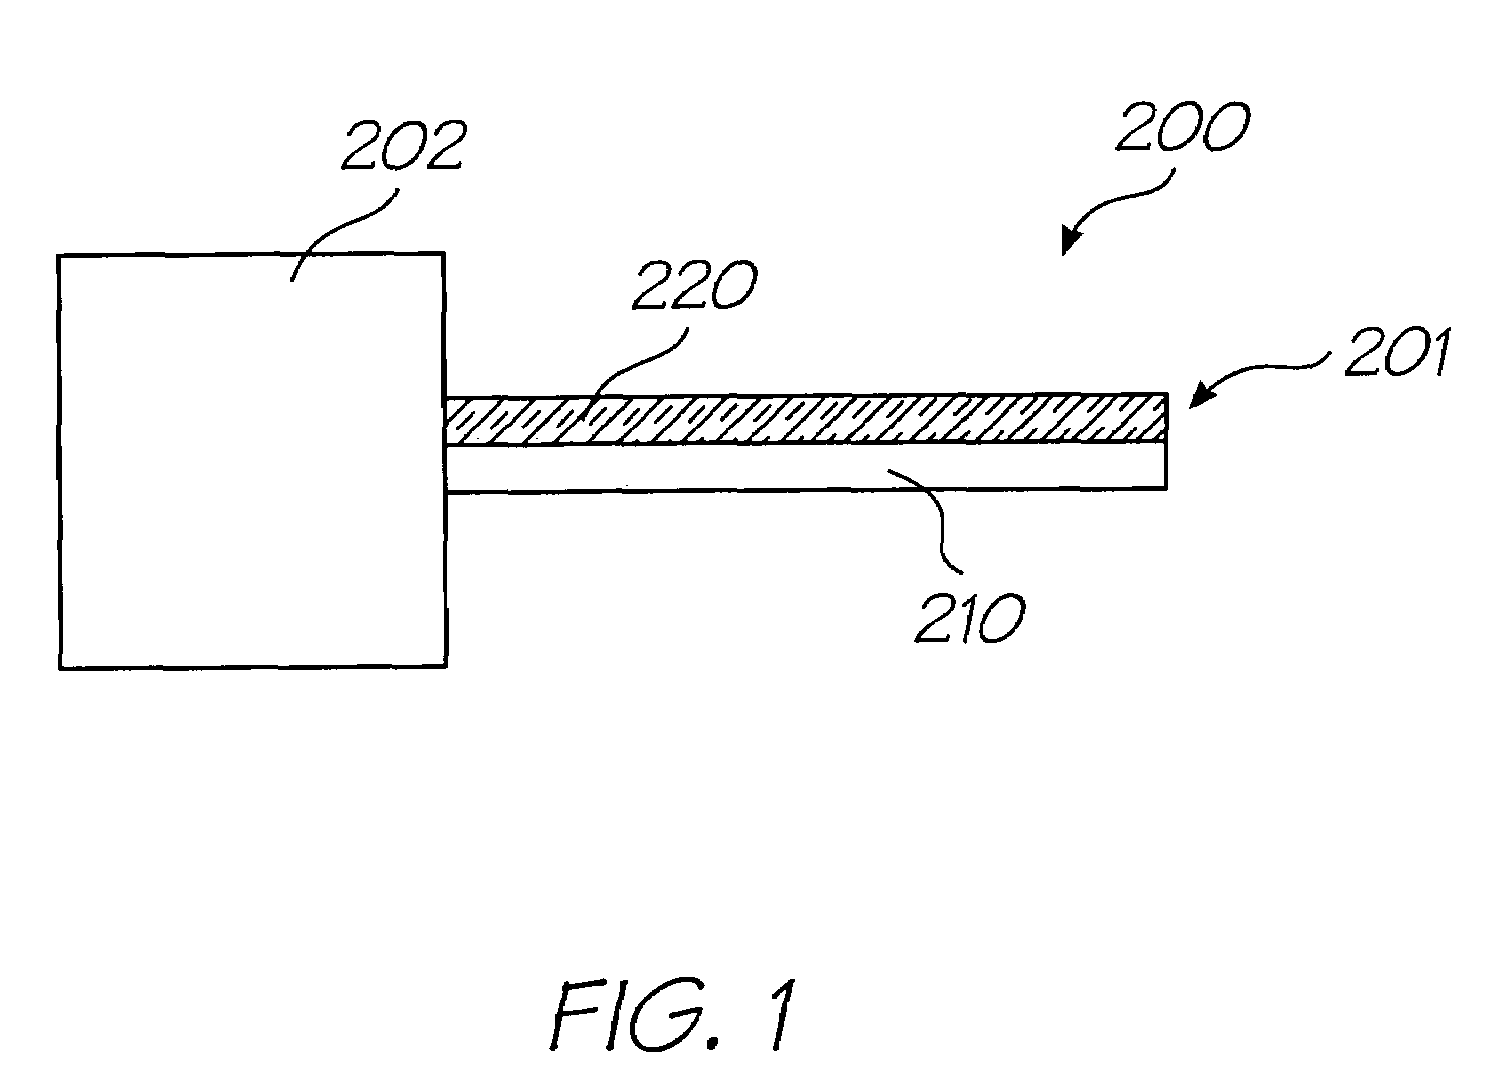 Inkjet nozzle assembly having moving roof portion defined by a thermal bend actuator having a plurality of cantilever beams